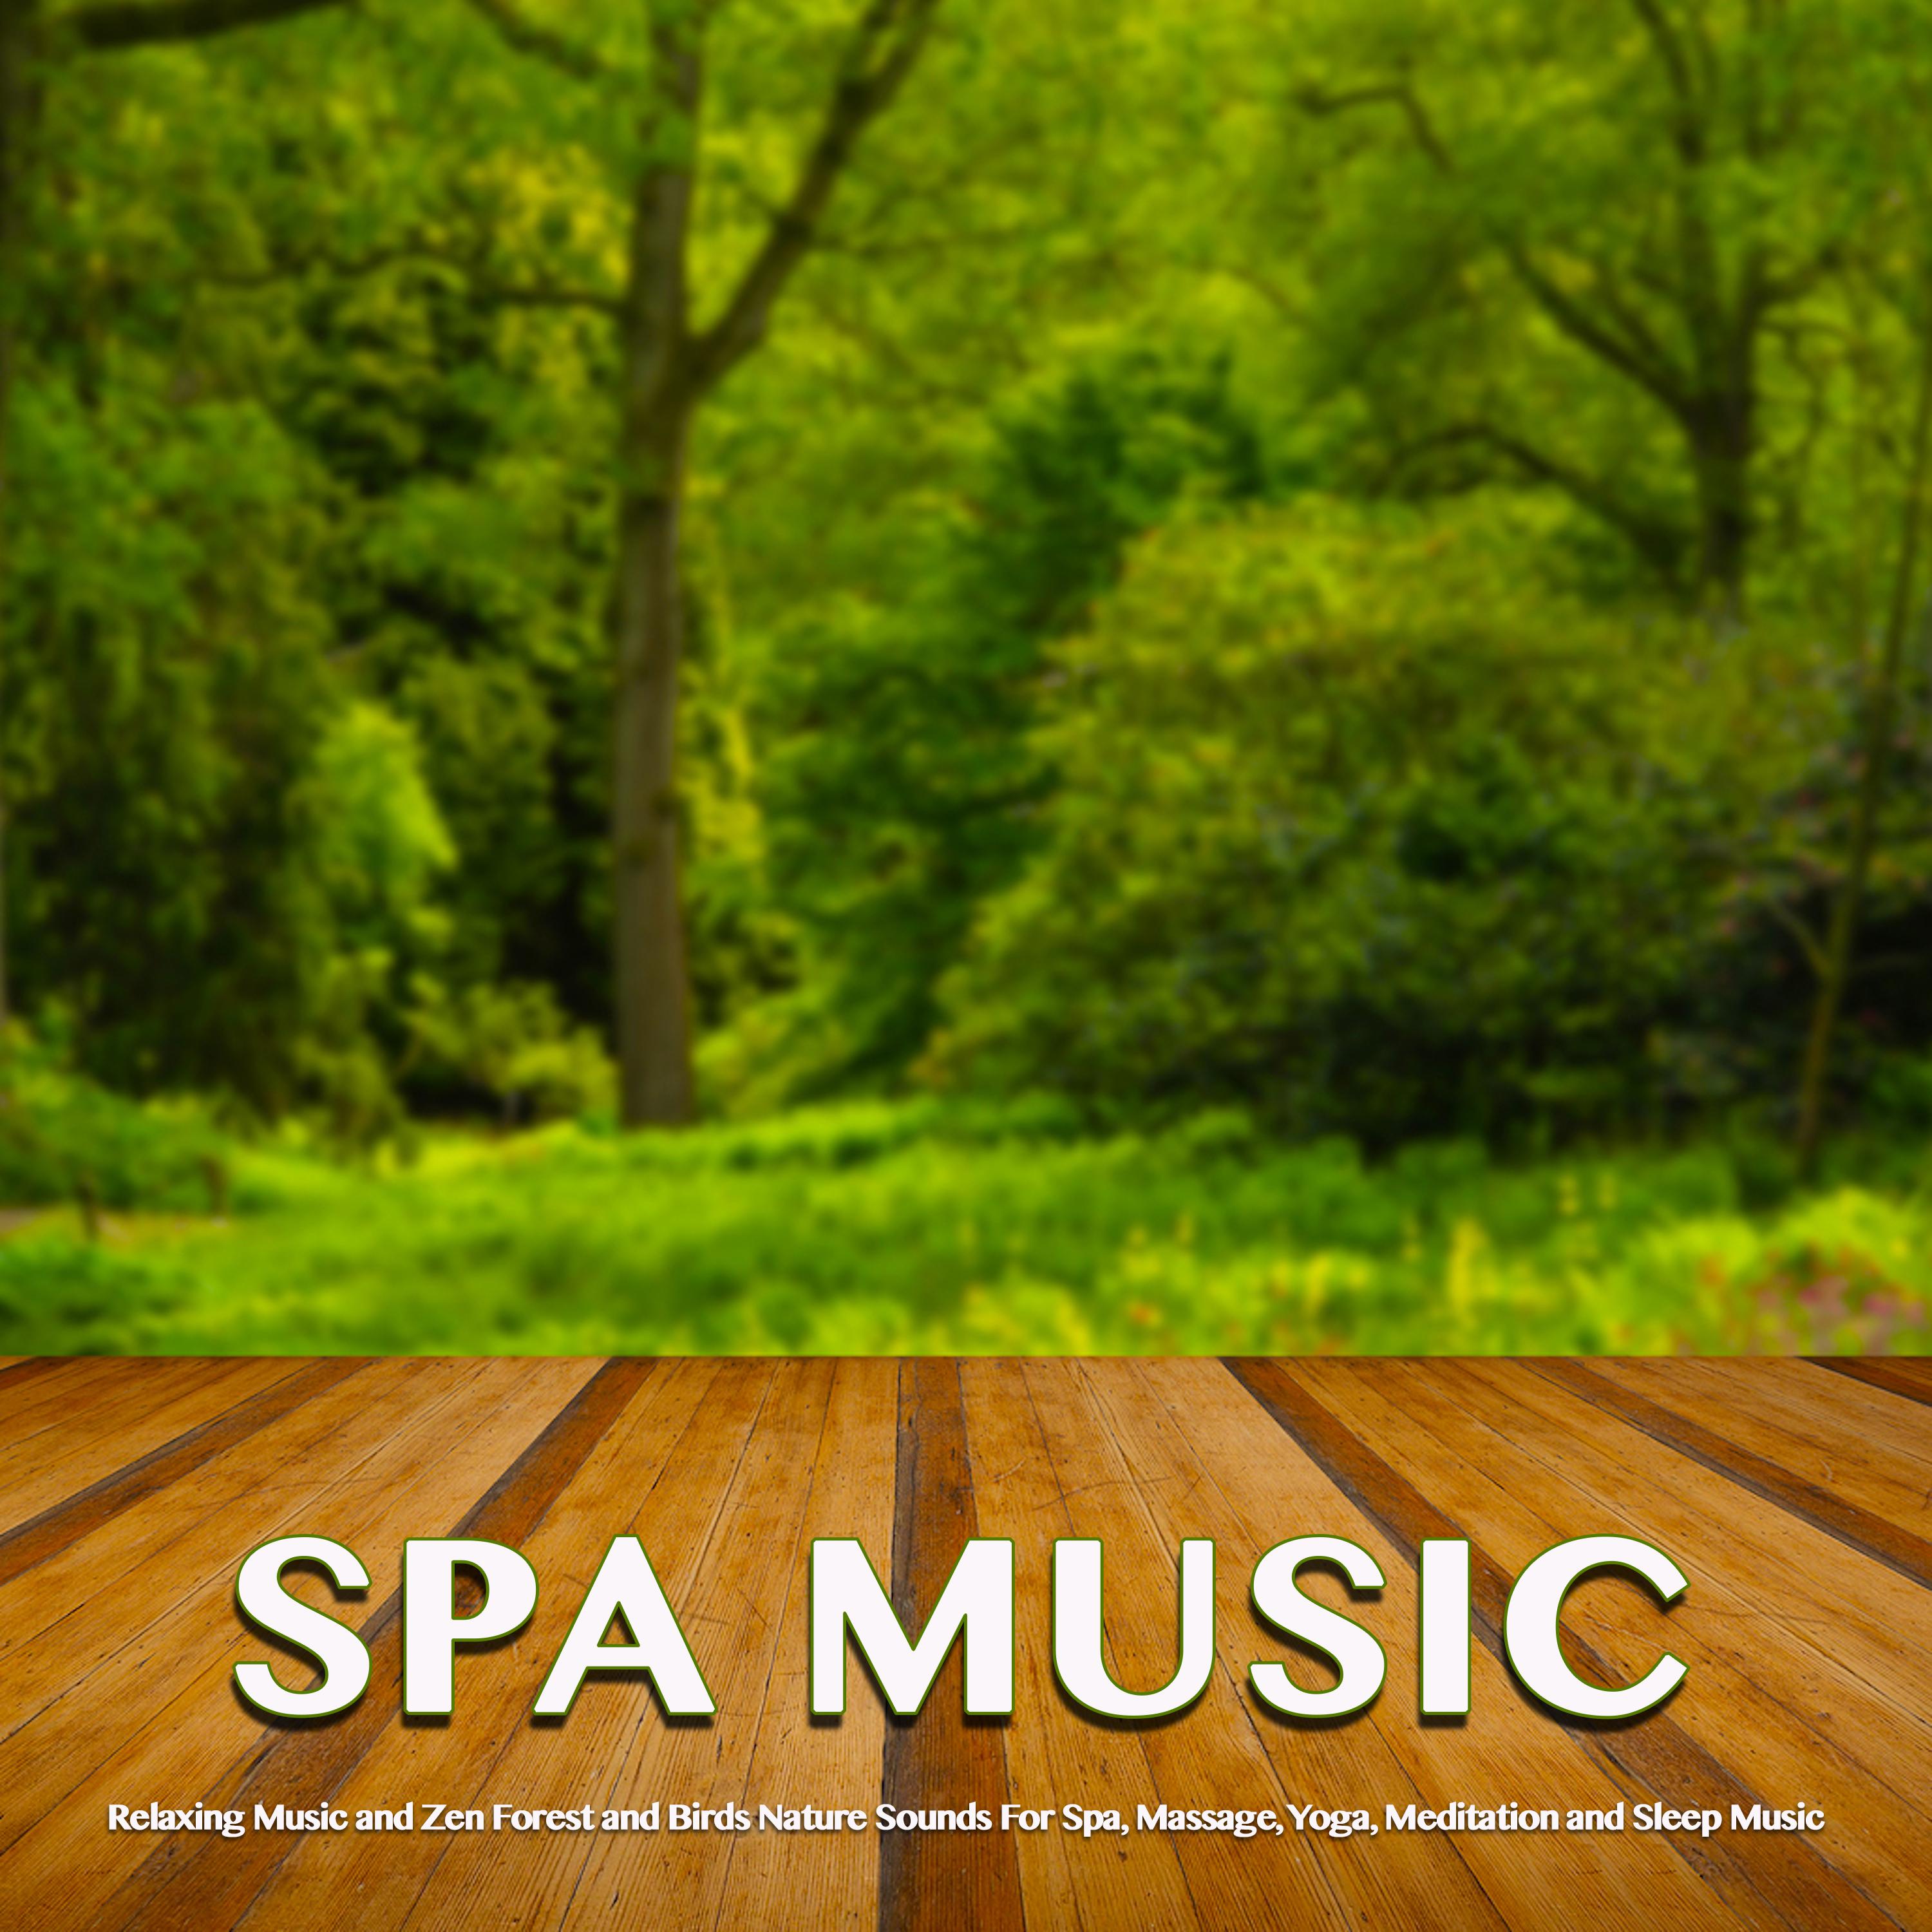 Spa Music: Relaxing Music and Zen Forest and Birds Nature Sounds For Spa, Massage, Yoga, Meditation and Sleep Music